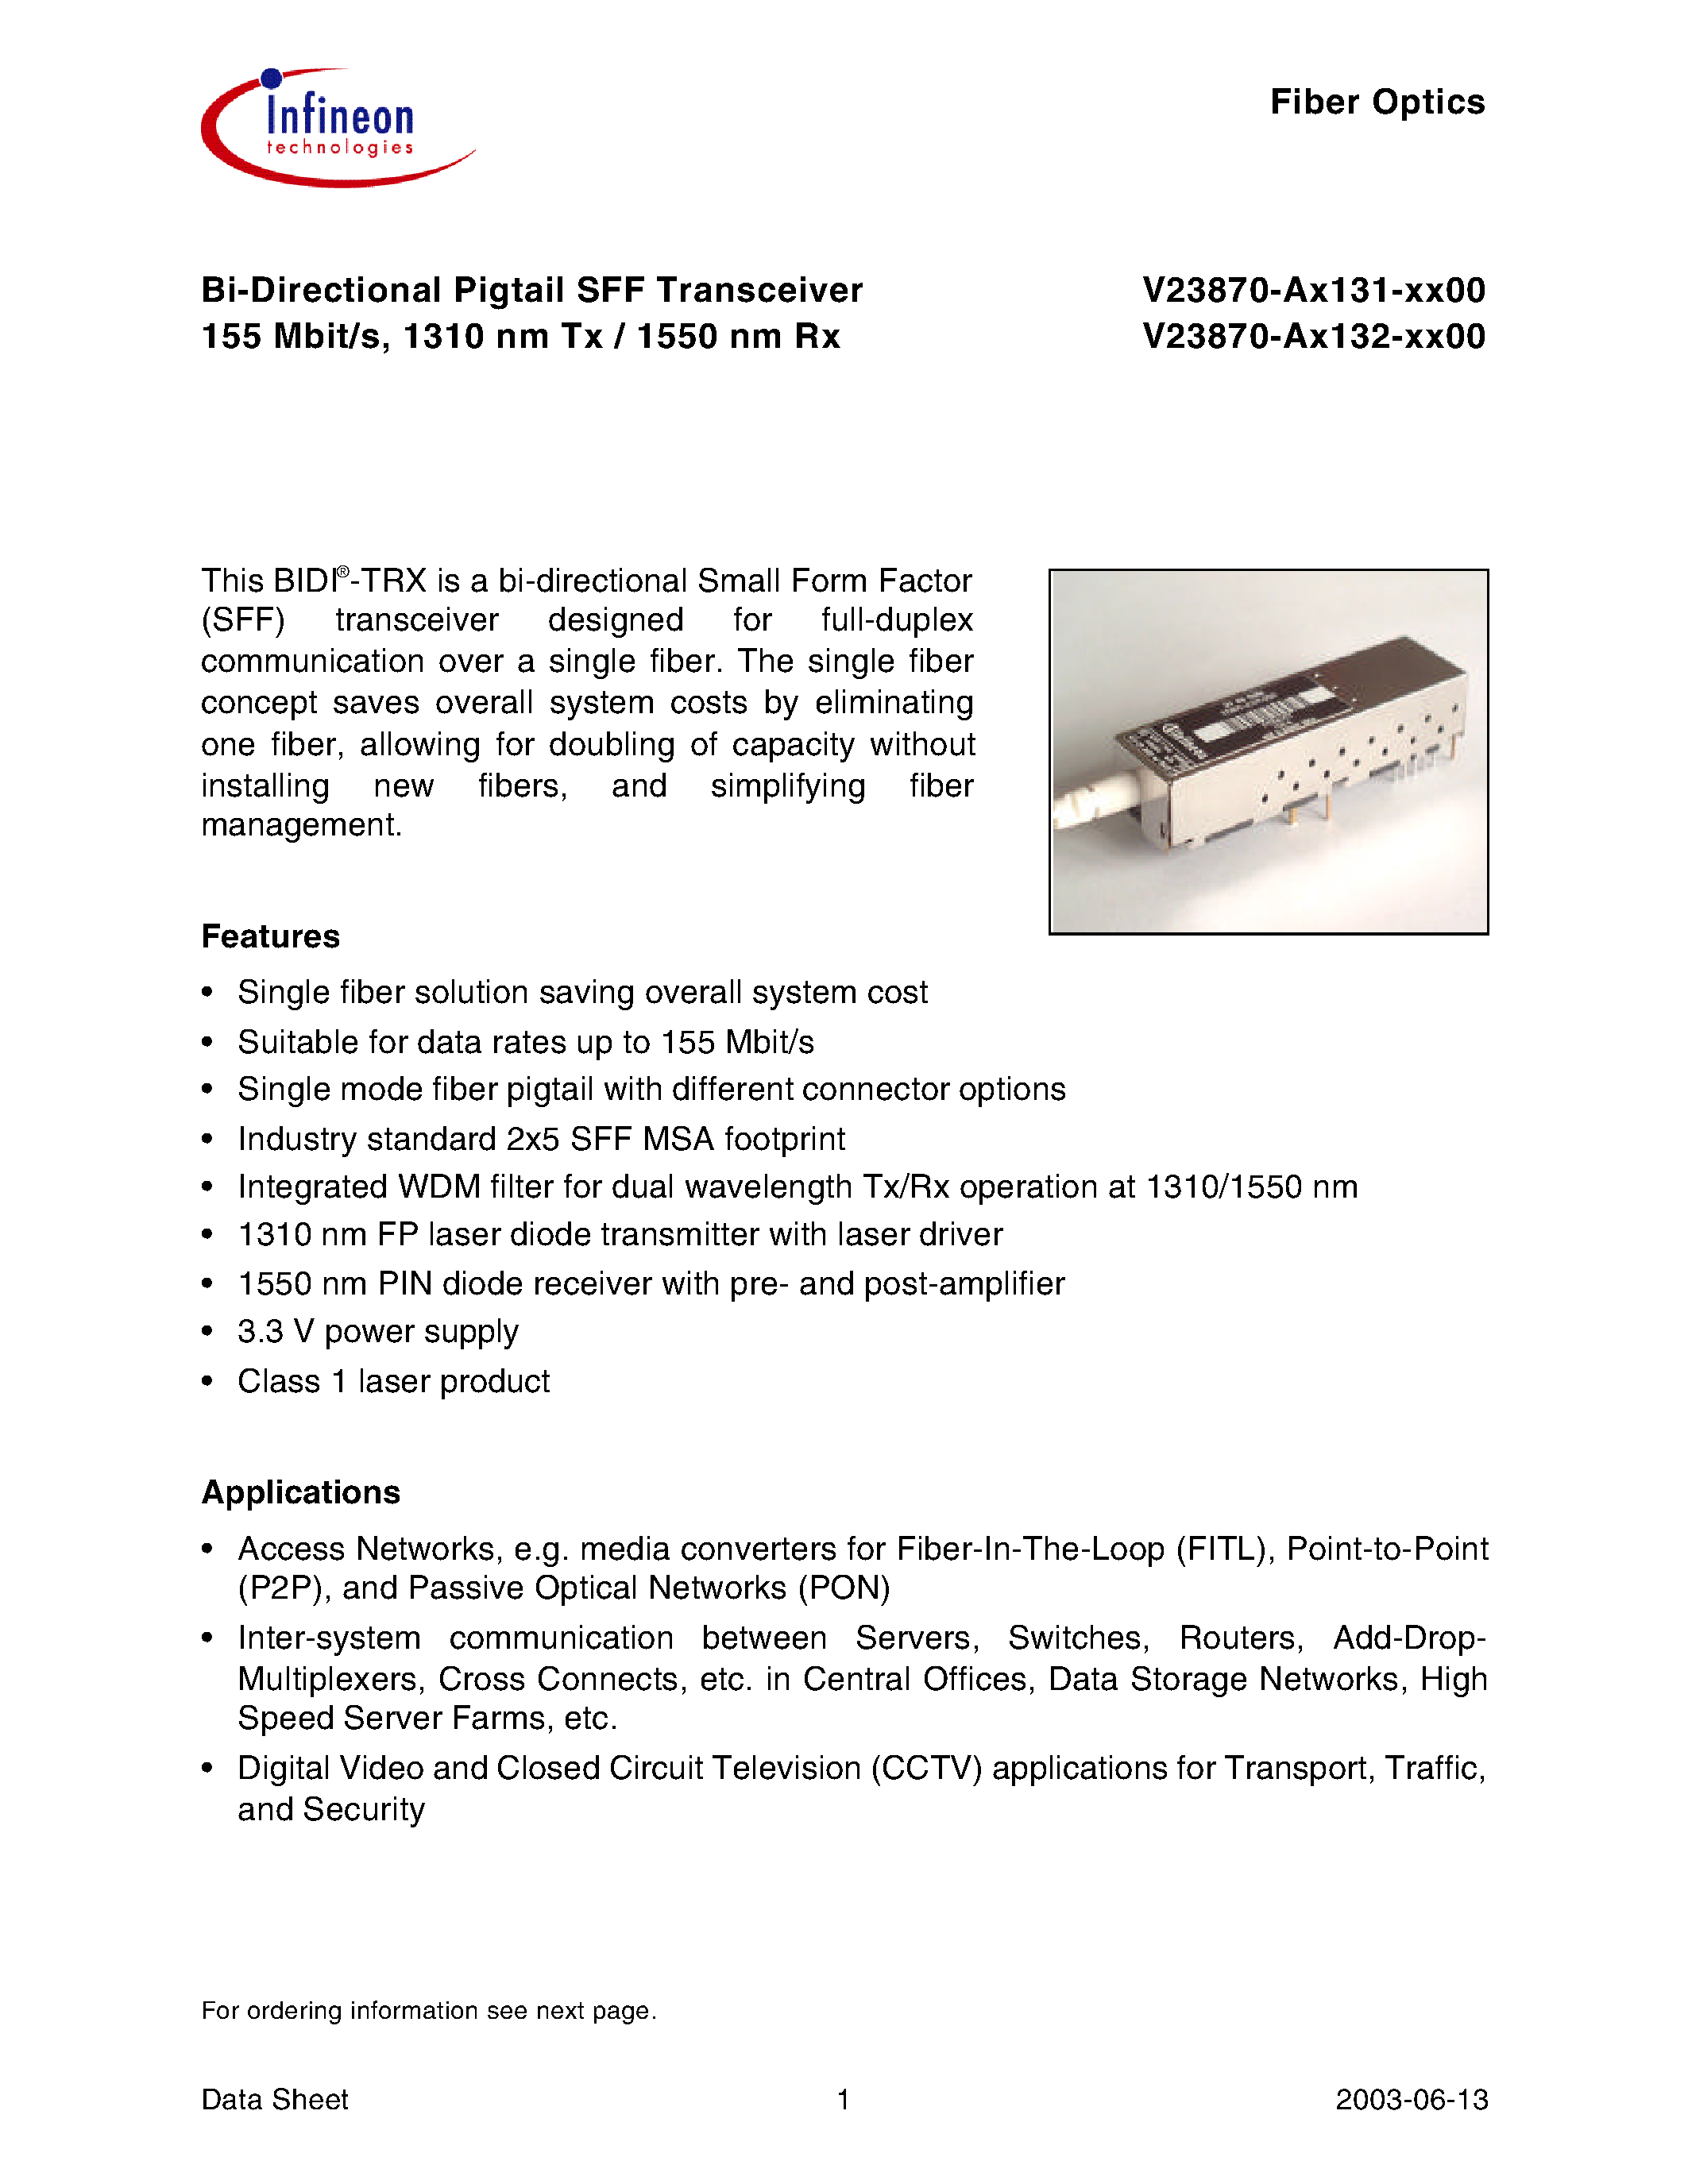 Datasheet V23870-A3132-F600 - Bi-Directional Pigtail SFF Transceiver 155 Mbit/s/ 1310 nm Tx / 1550 nm Rx page 1